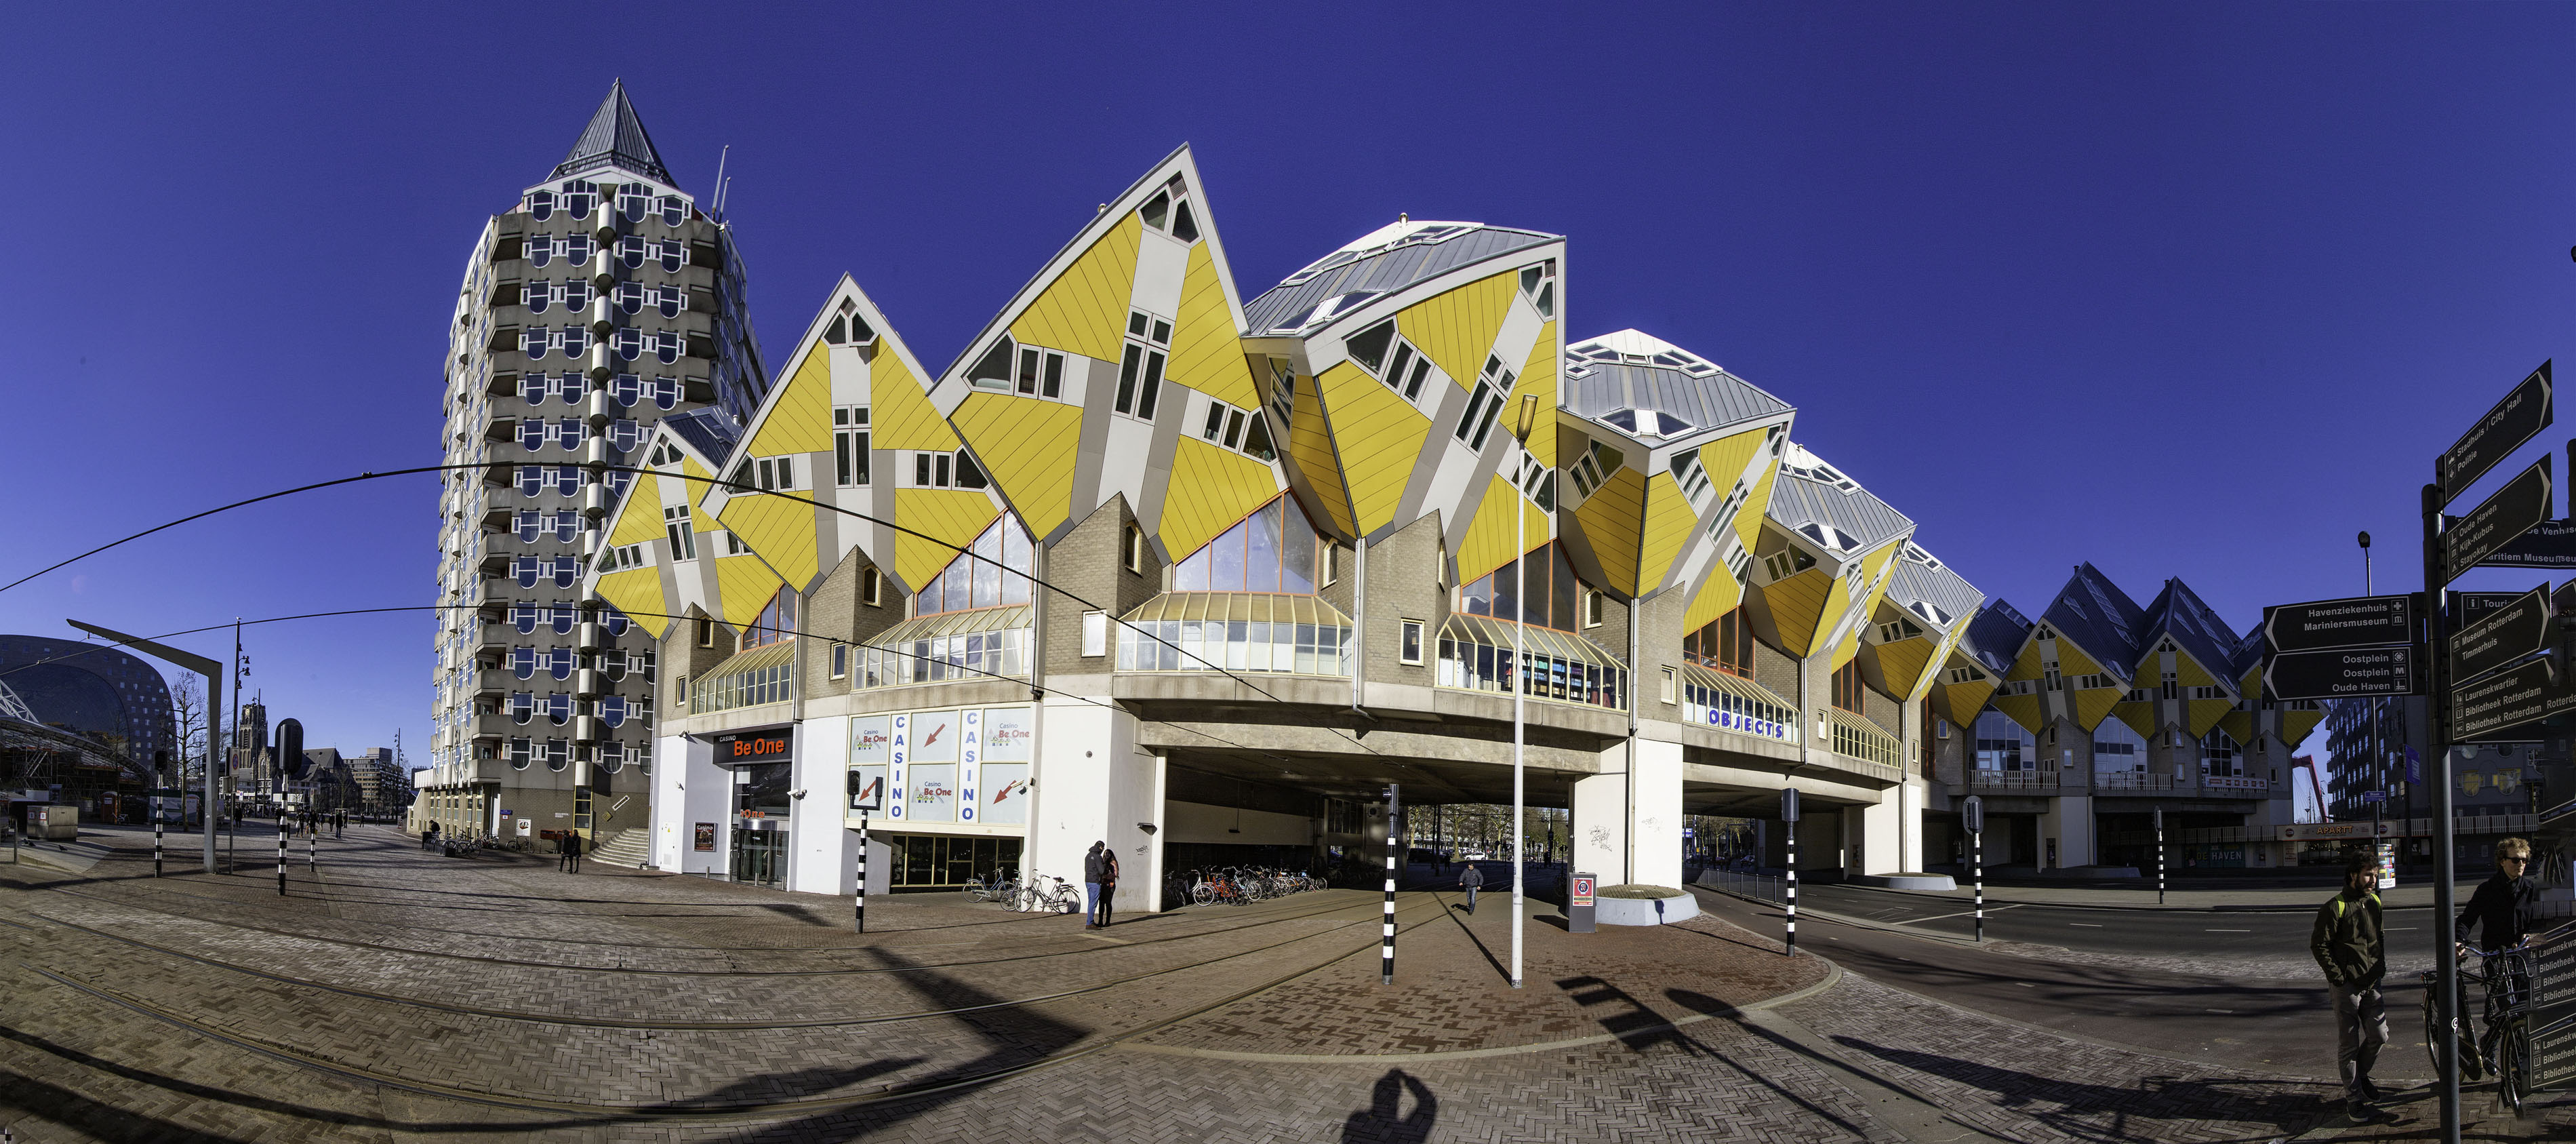 Cube Houses — Rotterdam, Netherlands | Source: Getty Images